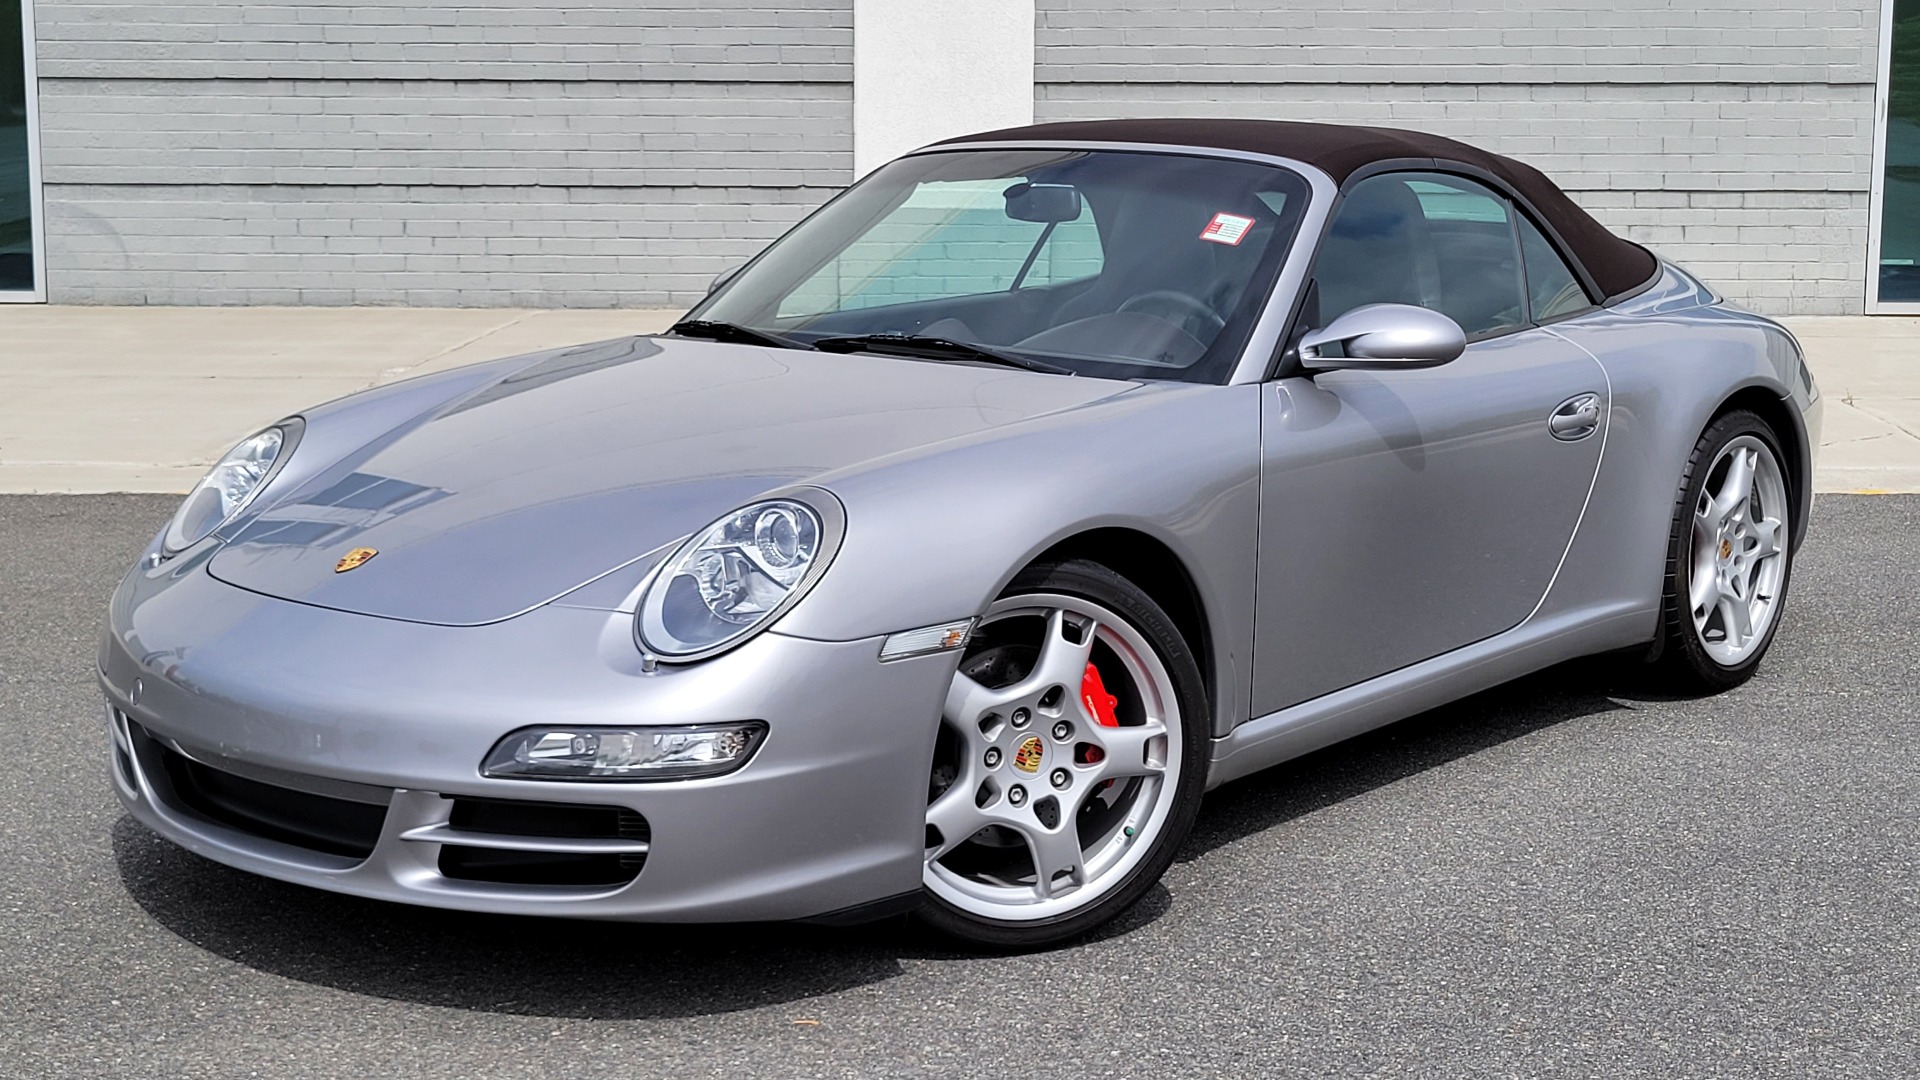 Used 2006 Porsche 911 CARRERA S CABRIOLET / SPORT CHRONO / BOSE / SPORT SEATS / SPORT SHIFTER for sale $62,999 at Formula Imports in Charlotte NC 28227 11